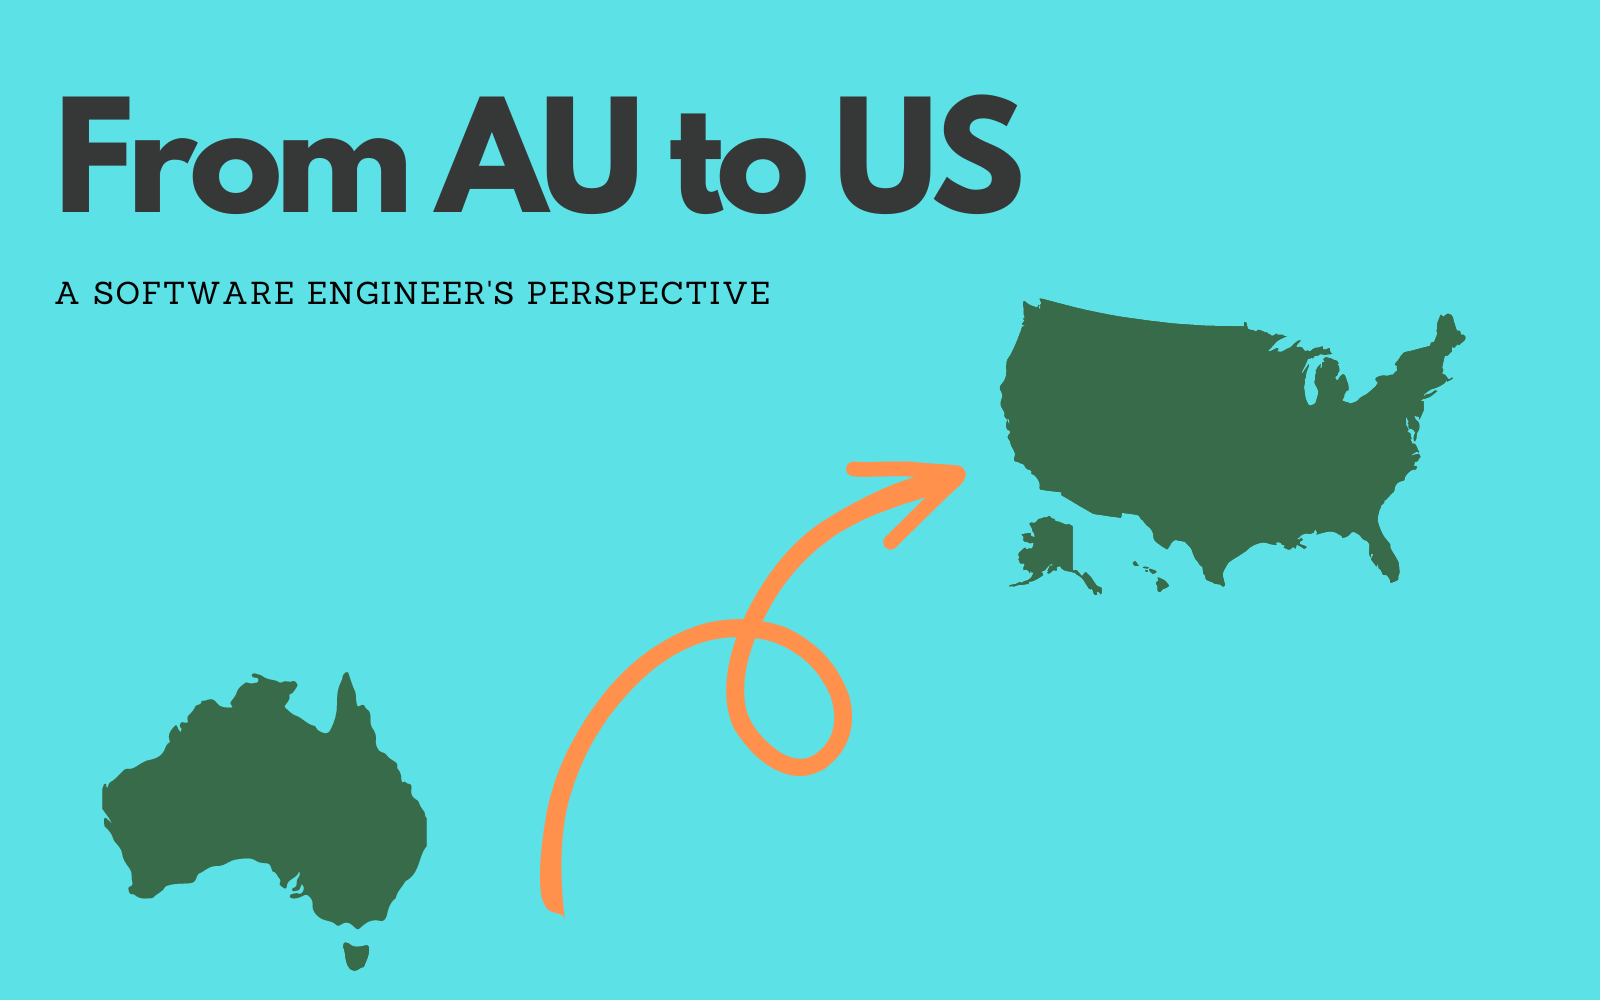 [Part III] Compensation and Interviewing in Tech: Differences between Australia and the US